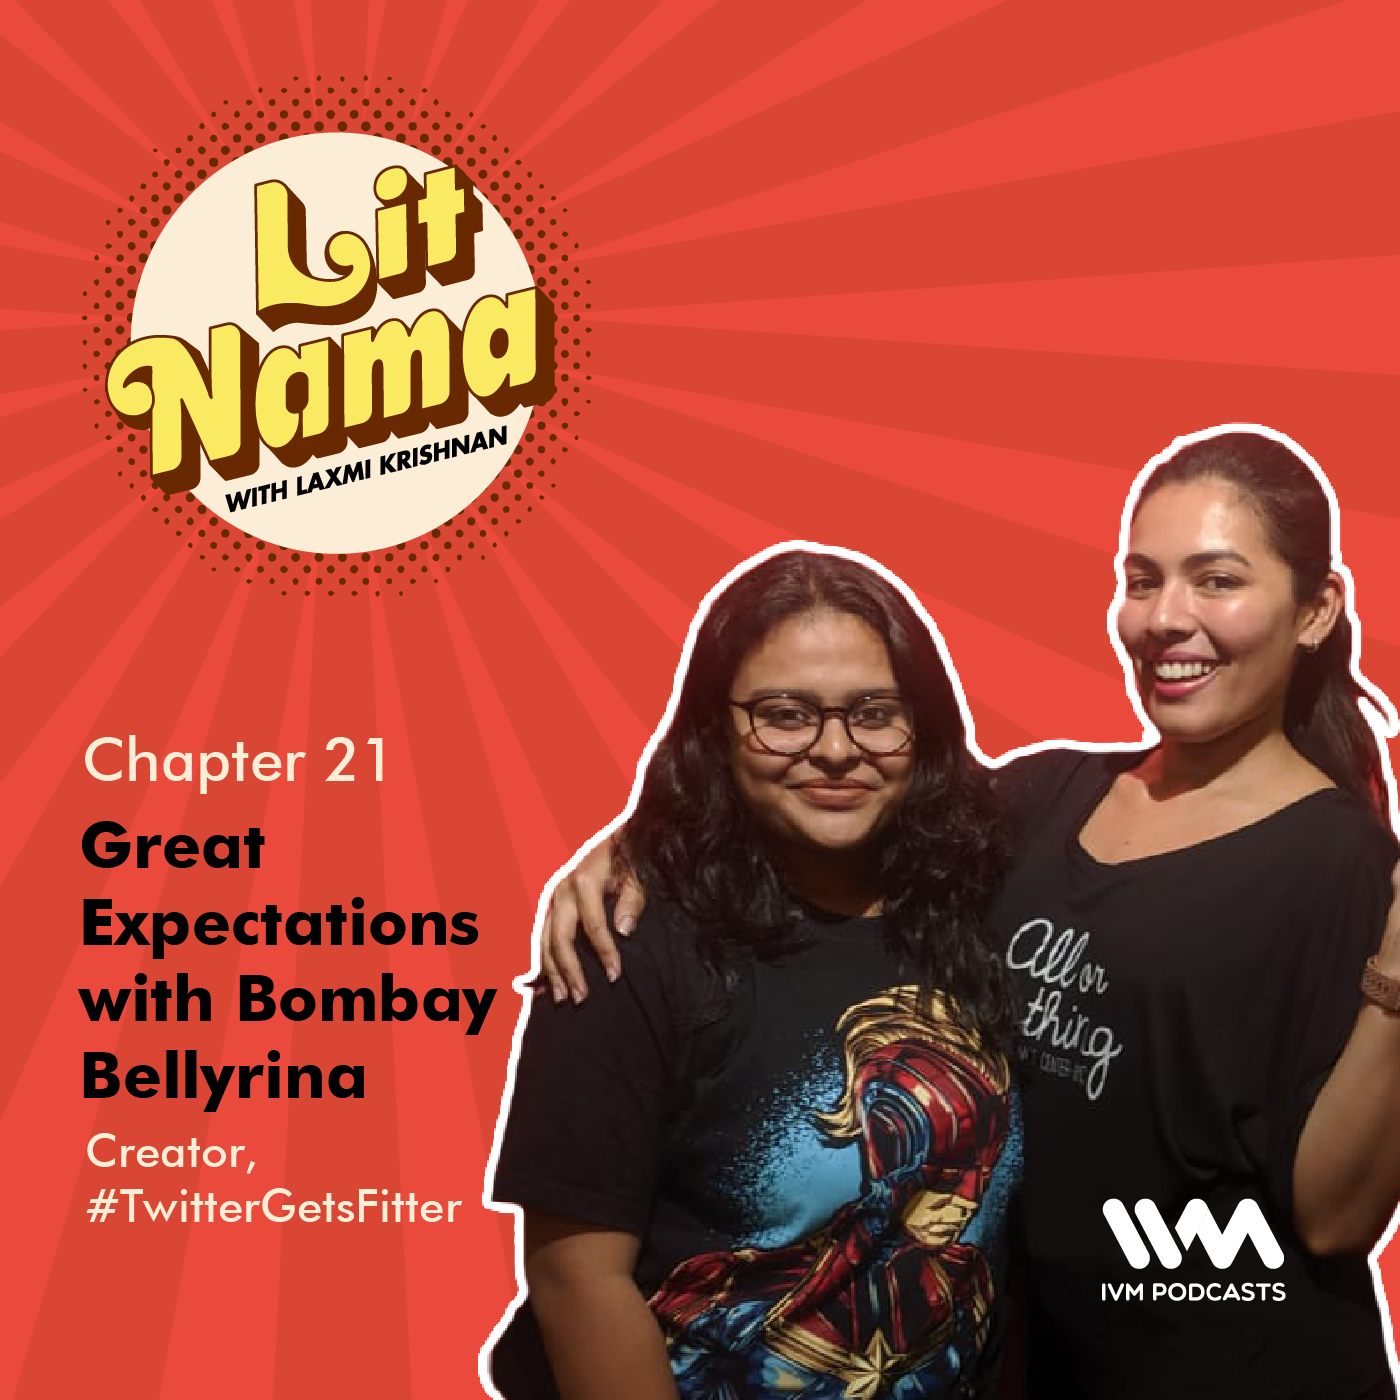 Chapter. 21: Great Expectations with Bombay Bellyrina